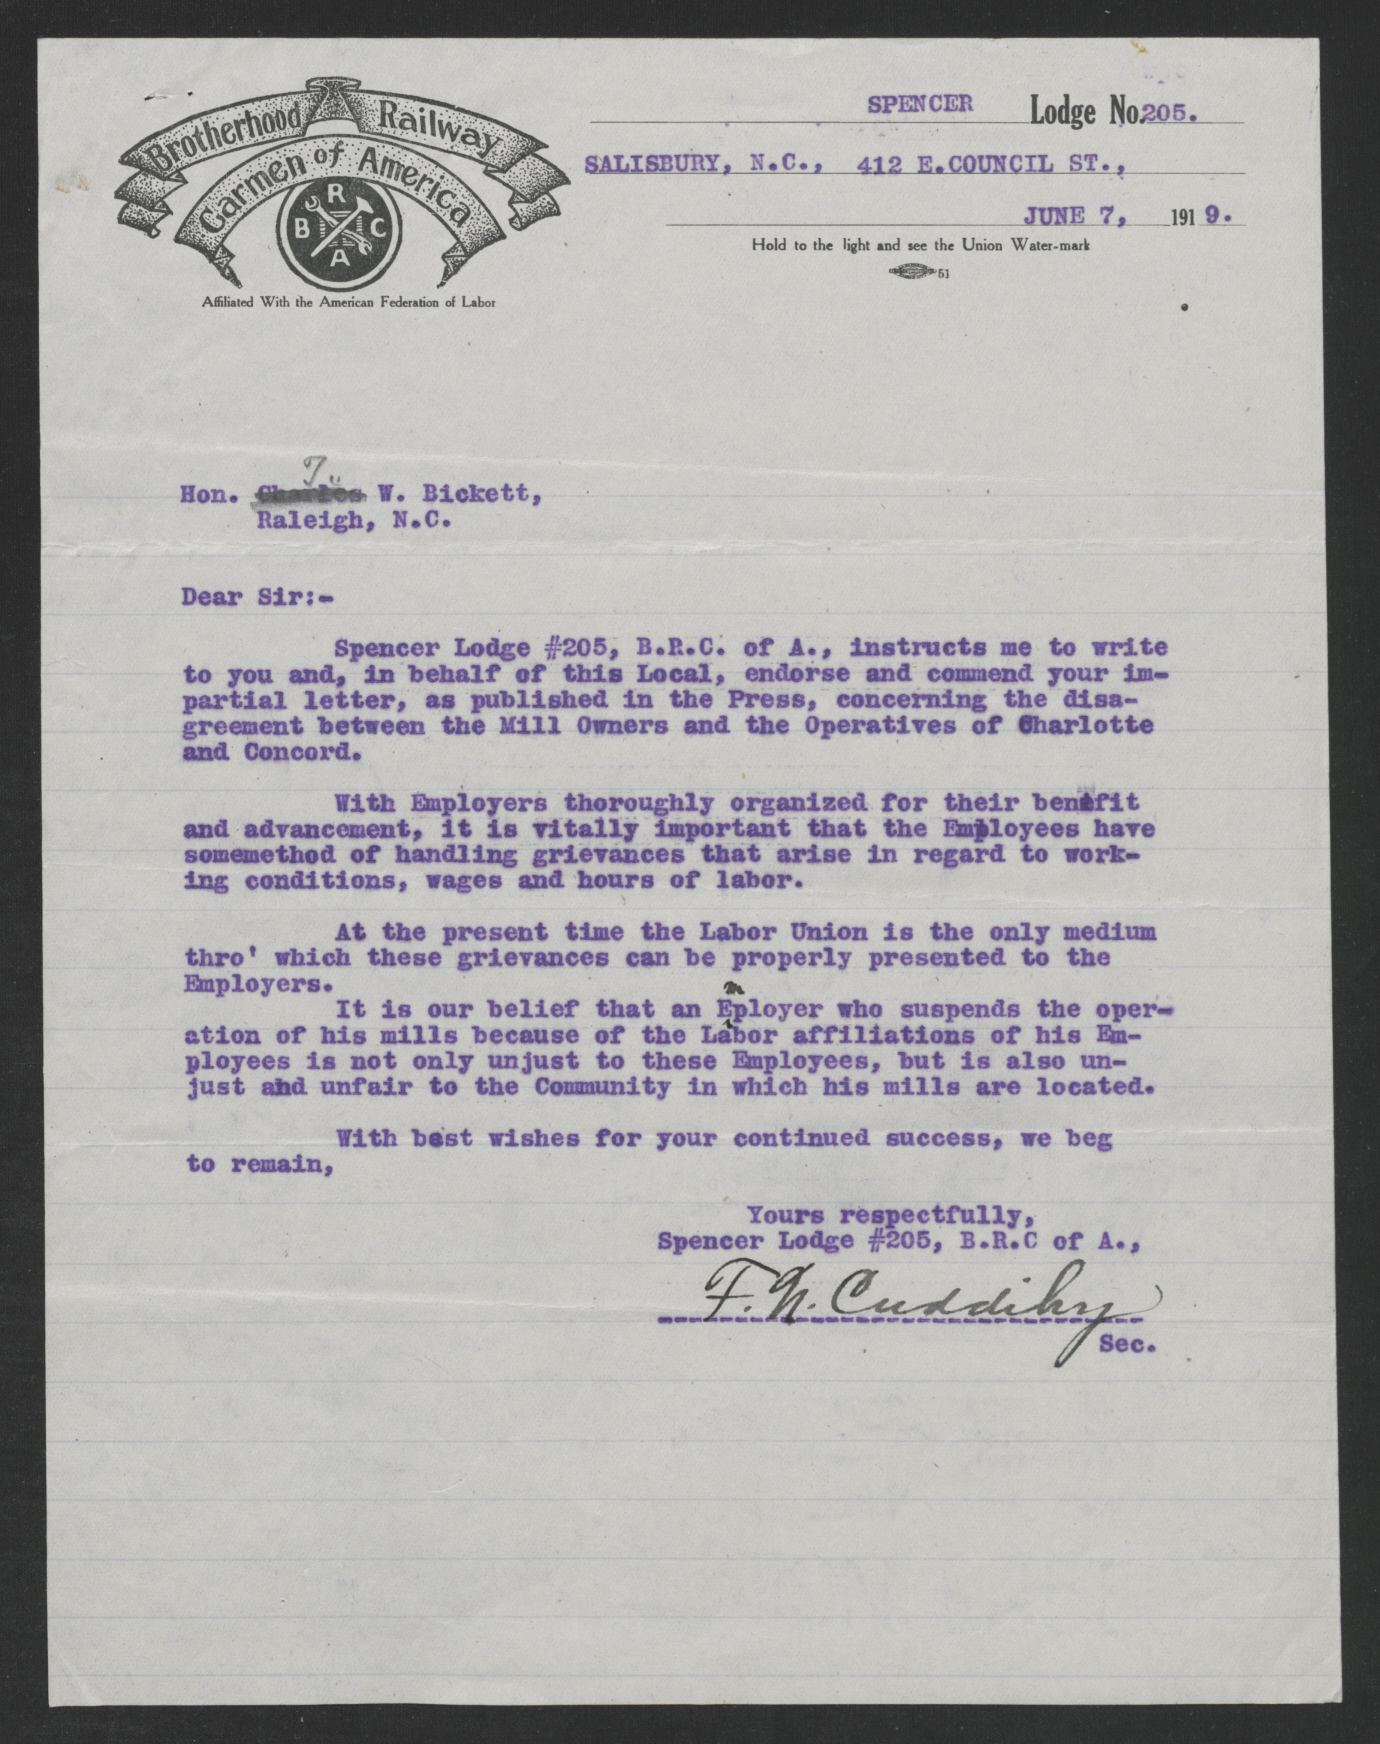 Letter from Francis N. Cuddihy to Gov. Bickett, June 7, 1919